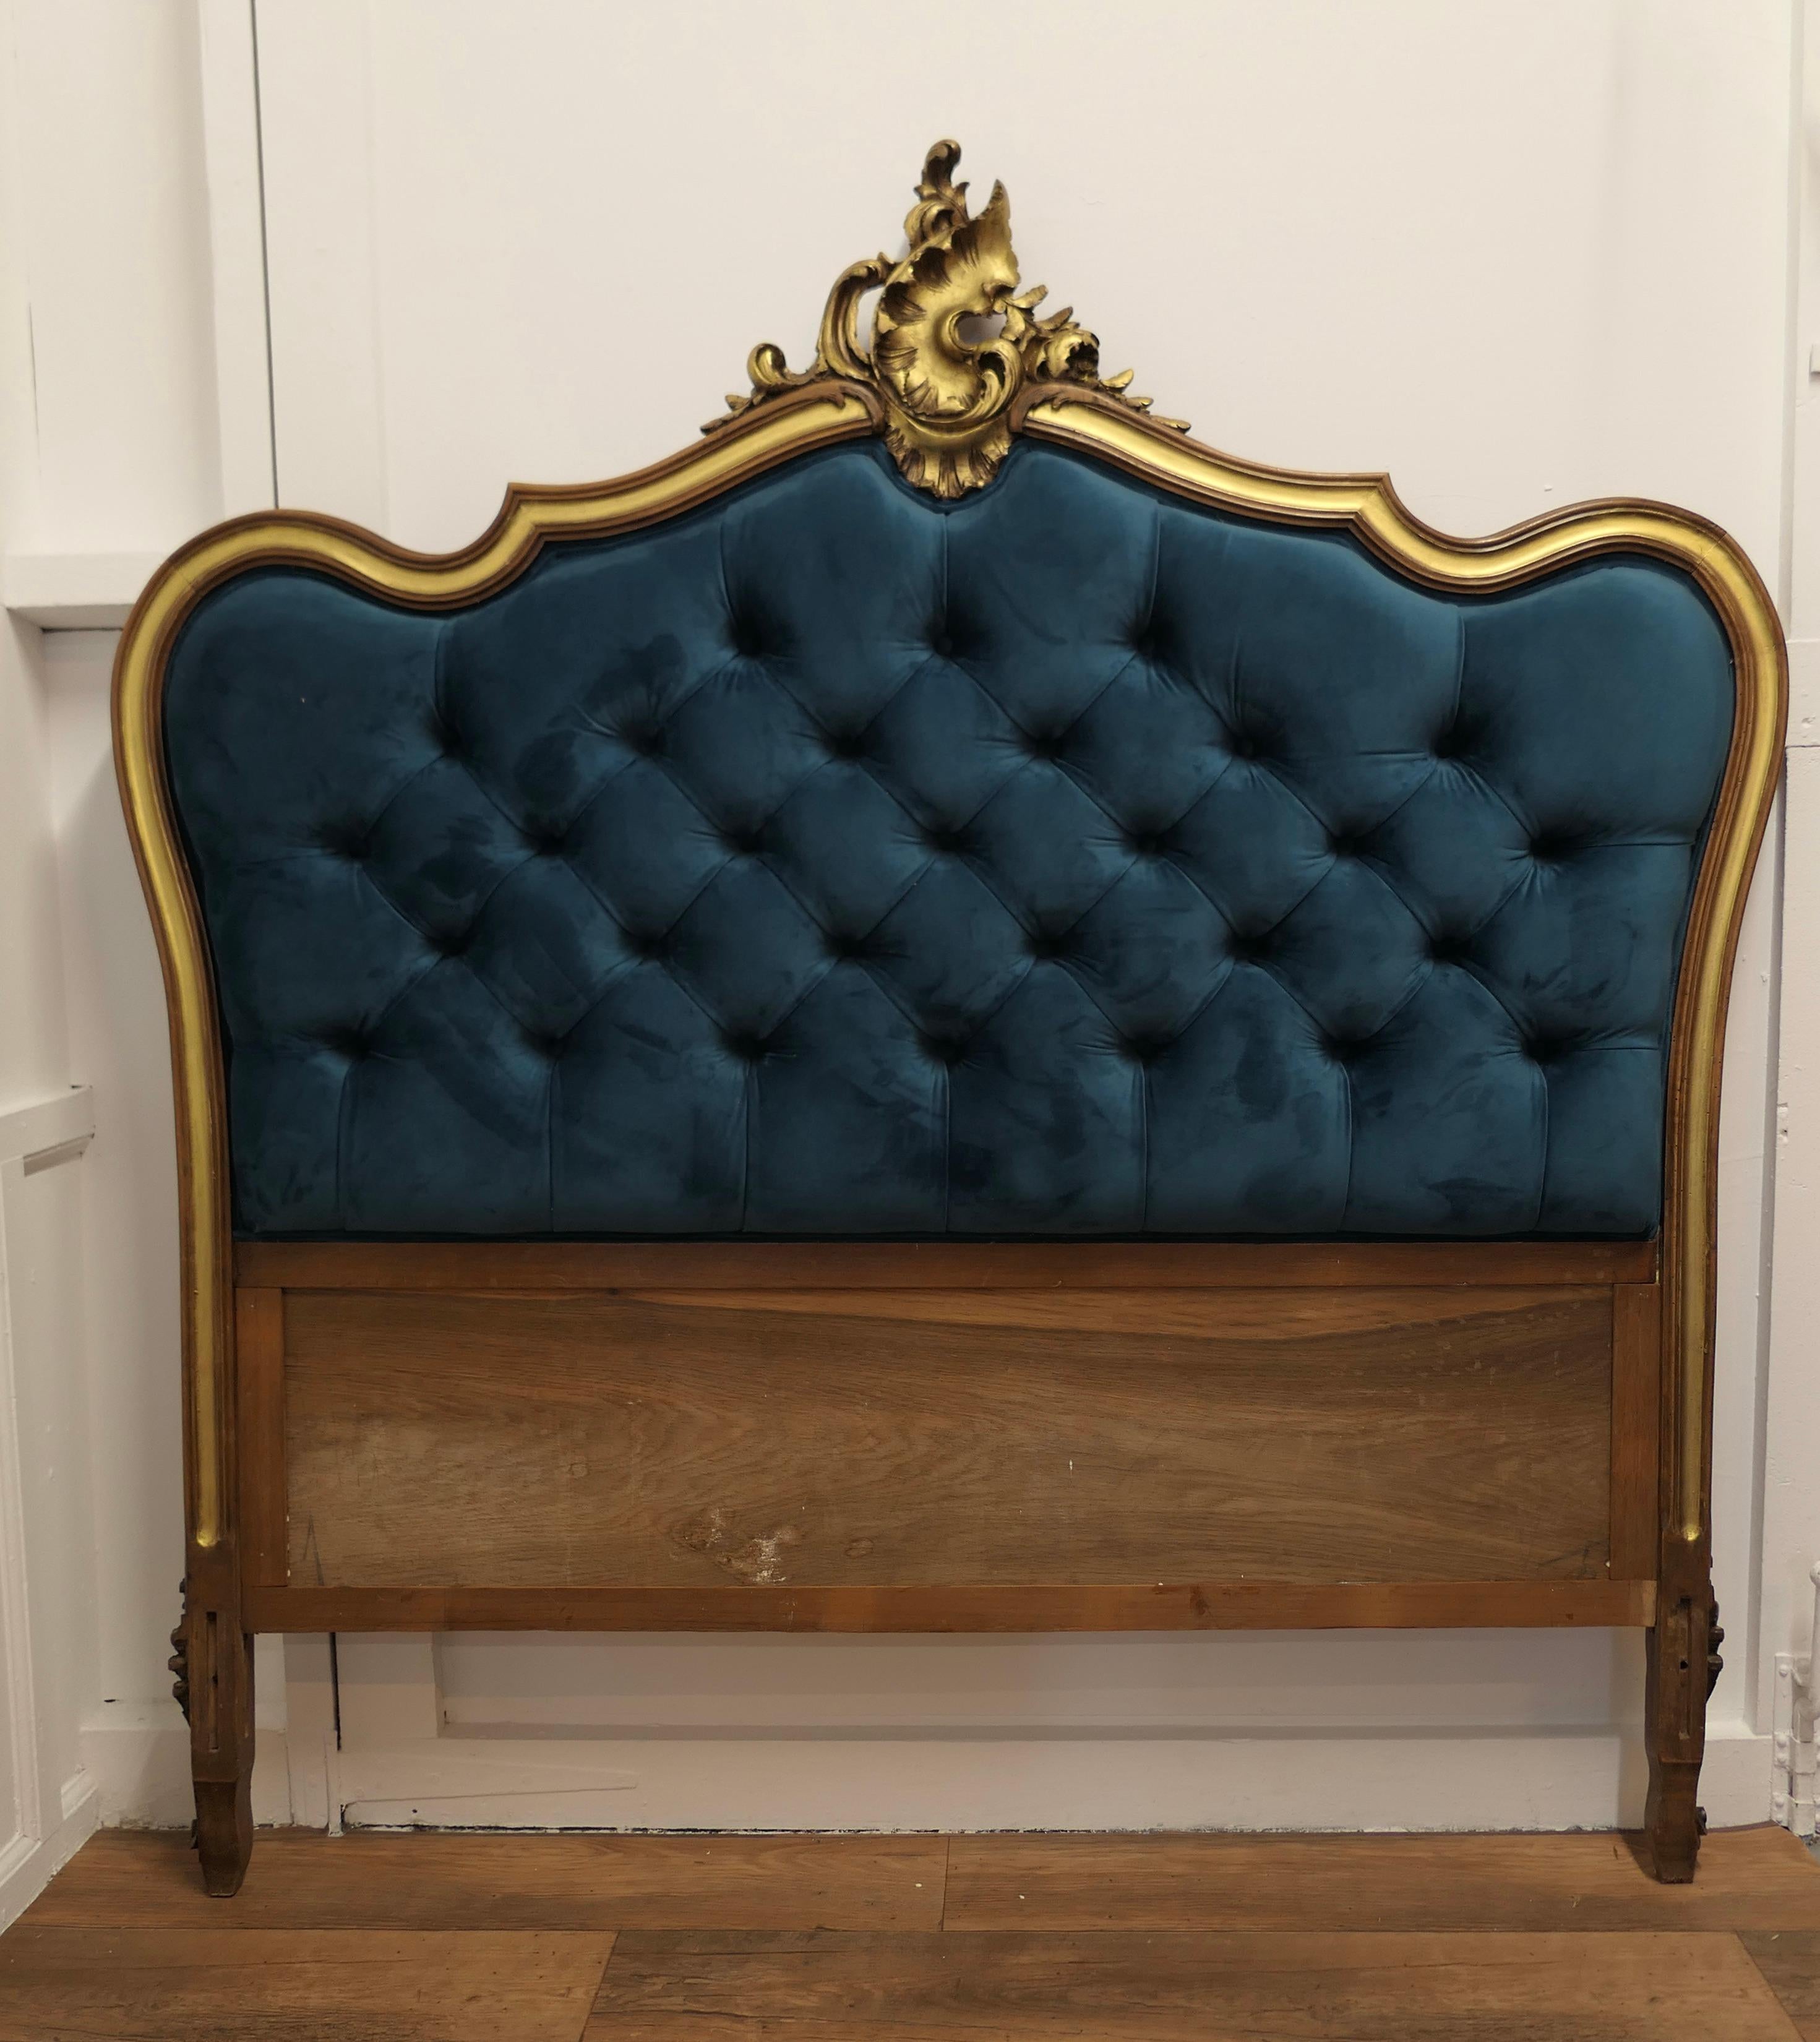 French Upholstered Bed Head, Deeply Buttoned in Teal Velvet 

This is a Walnut Headboard with the highlights picked out in Gold it is upholstered in Lush Teal Velvet with deep buttoning making it very comfortable to lean against
 The head board